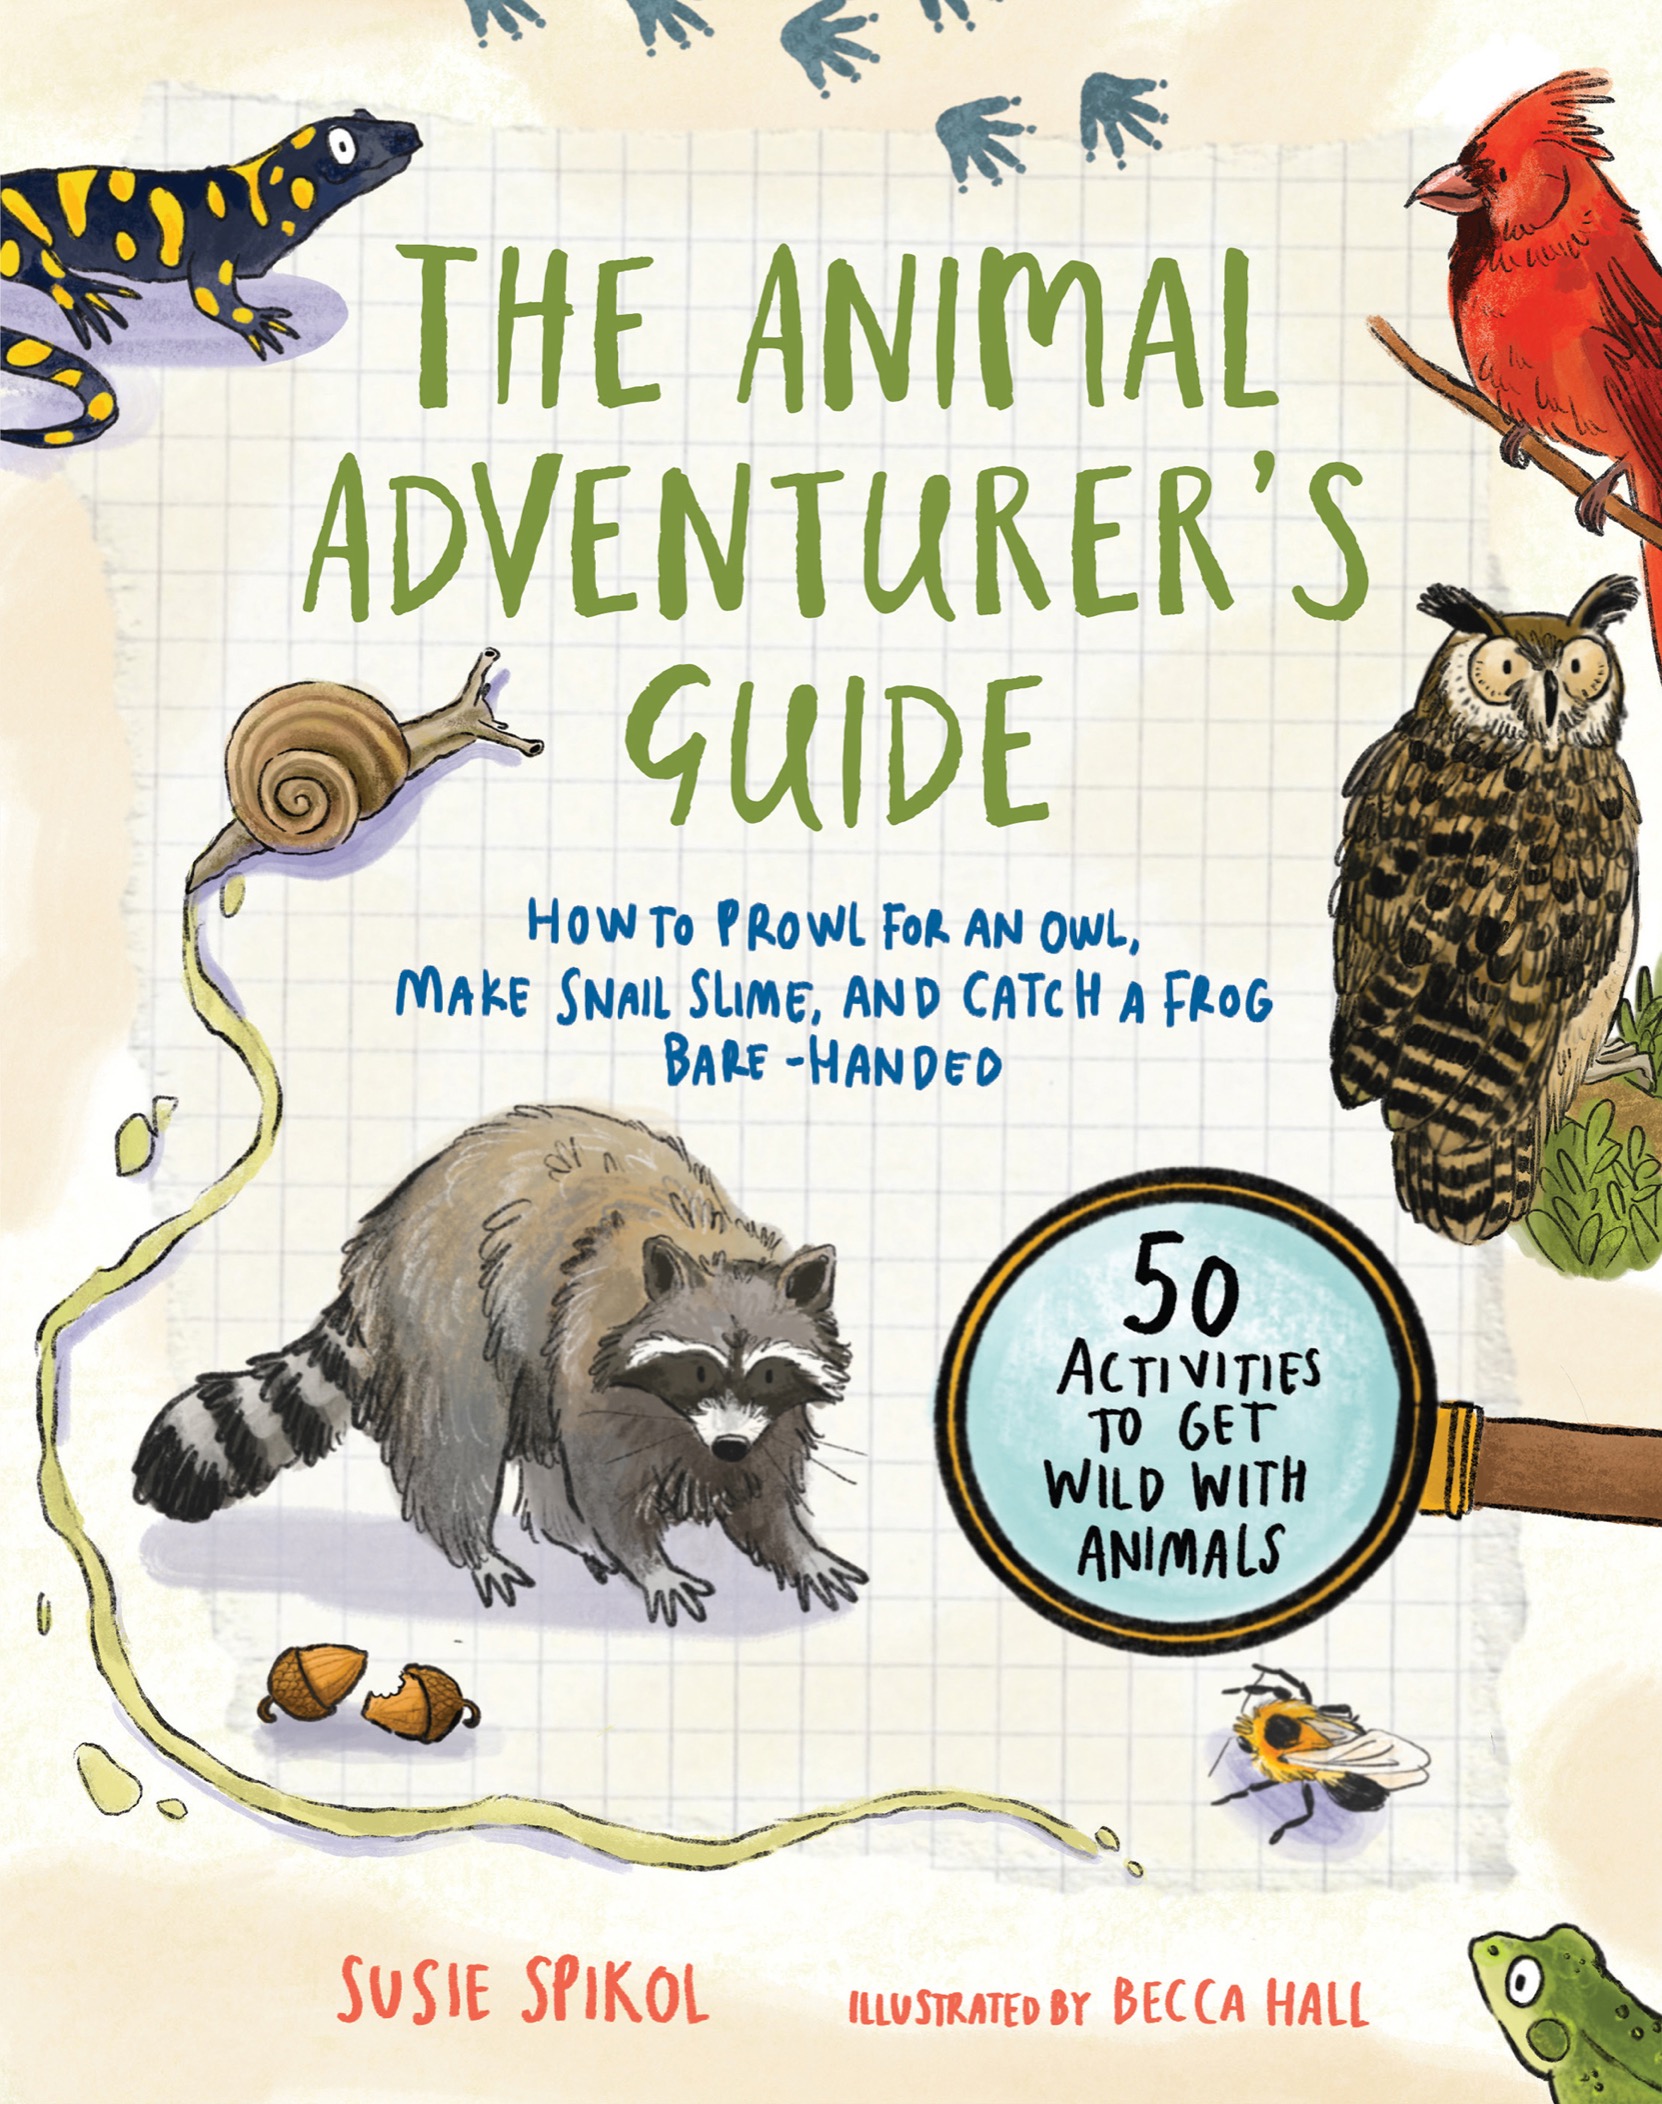 The Animal Adventurers Guide How to Prowl for an Owl Make Snail Slime and Catch a Frog Bare-Handed50 Activities to Get Wild with Animals - photo 1